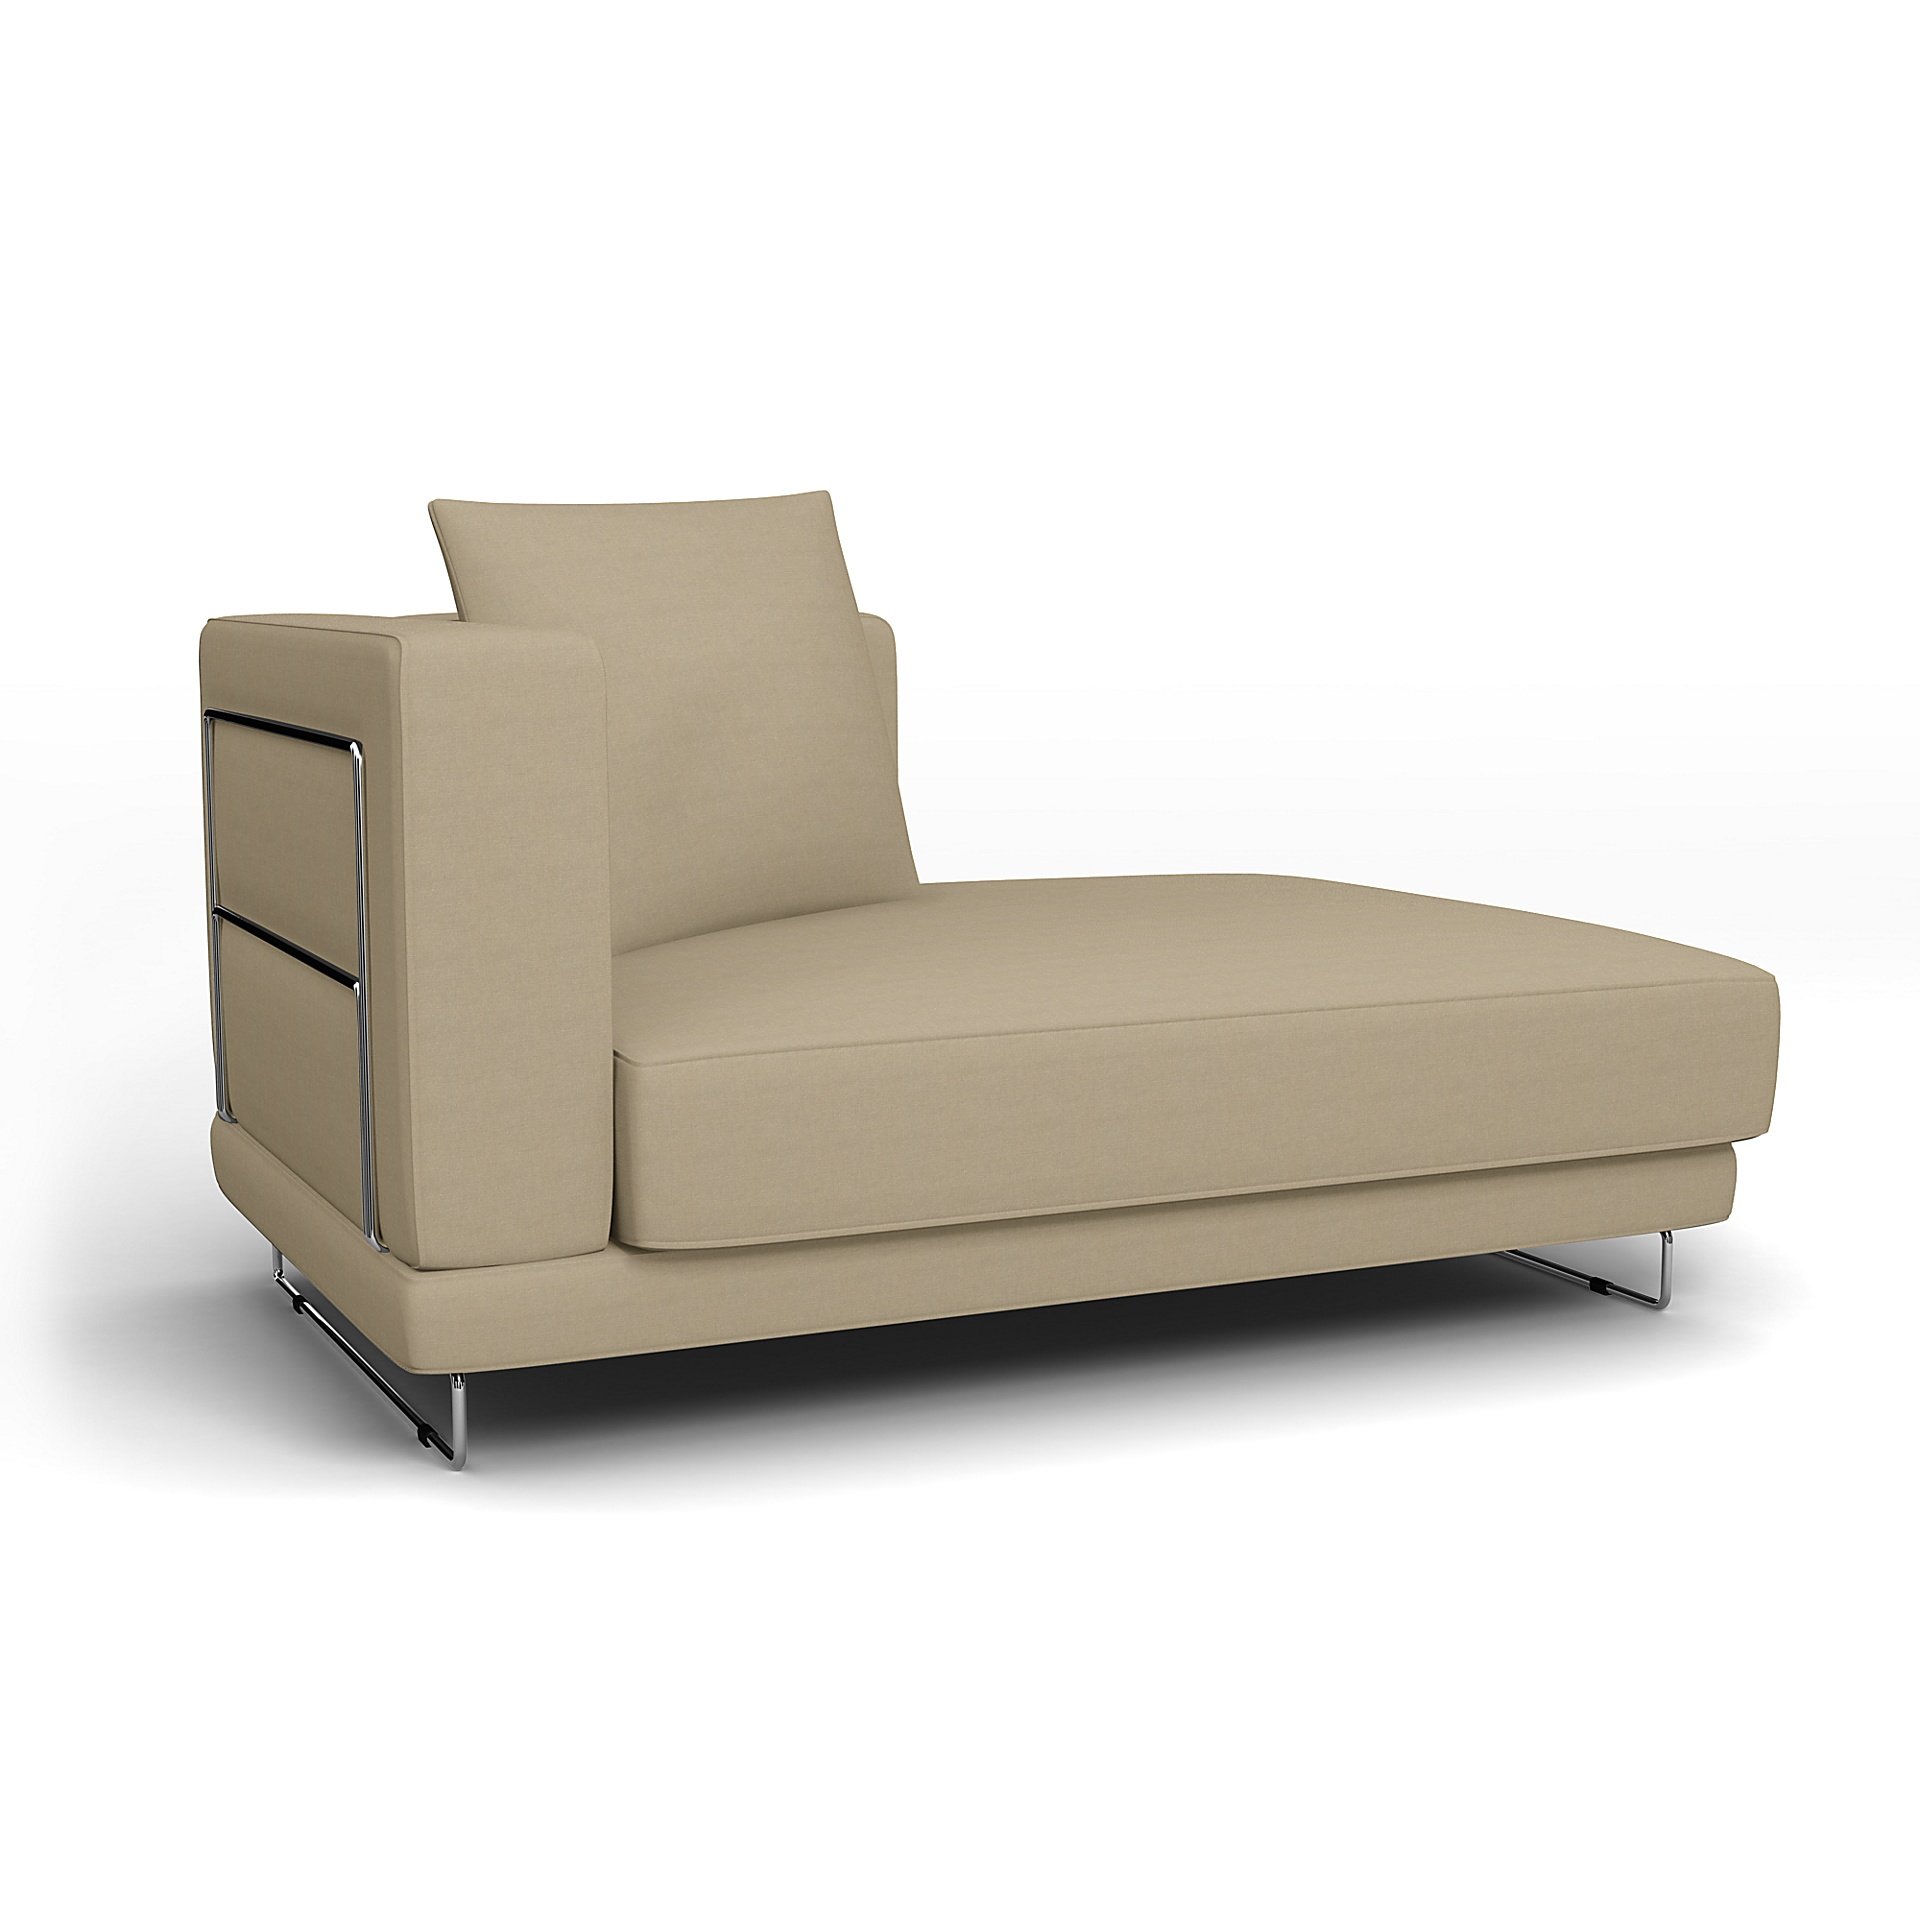 IKEA - Tylosand Chaise with Right Armrest Cover, Tan, Linen - Bemz